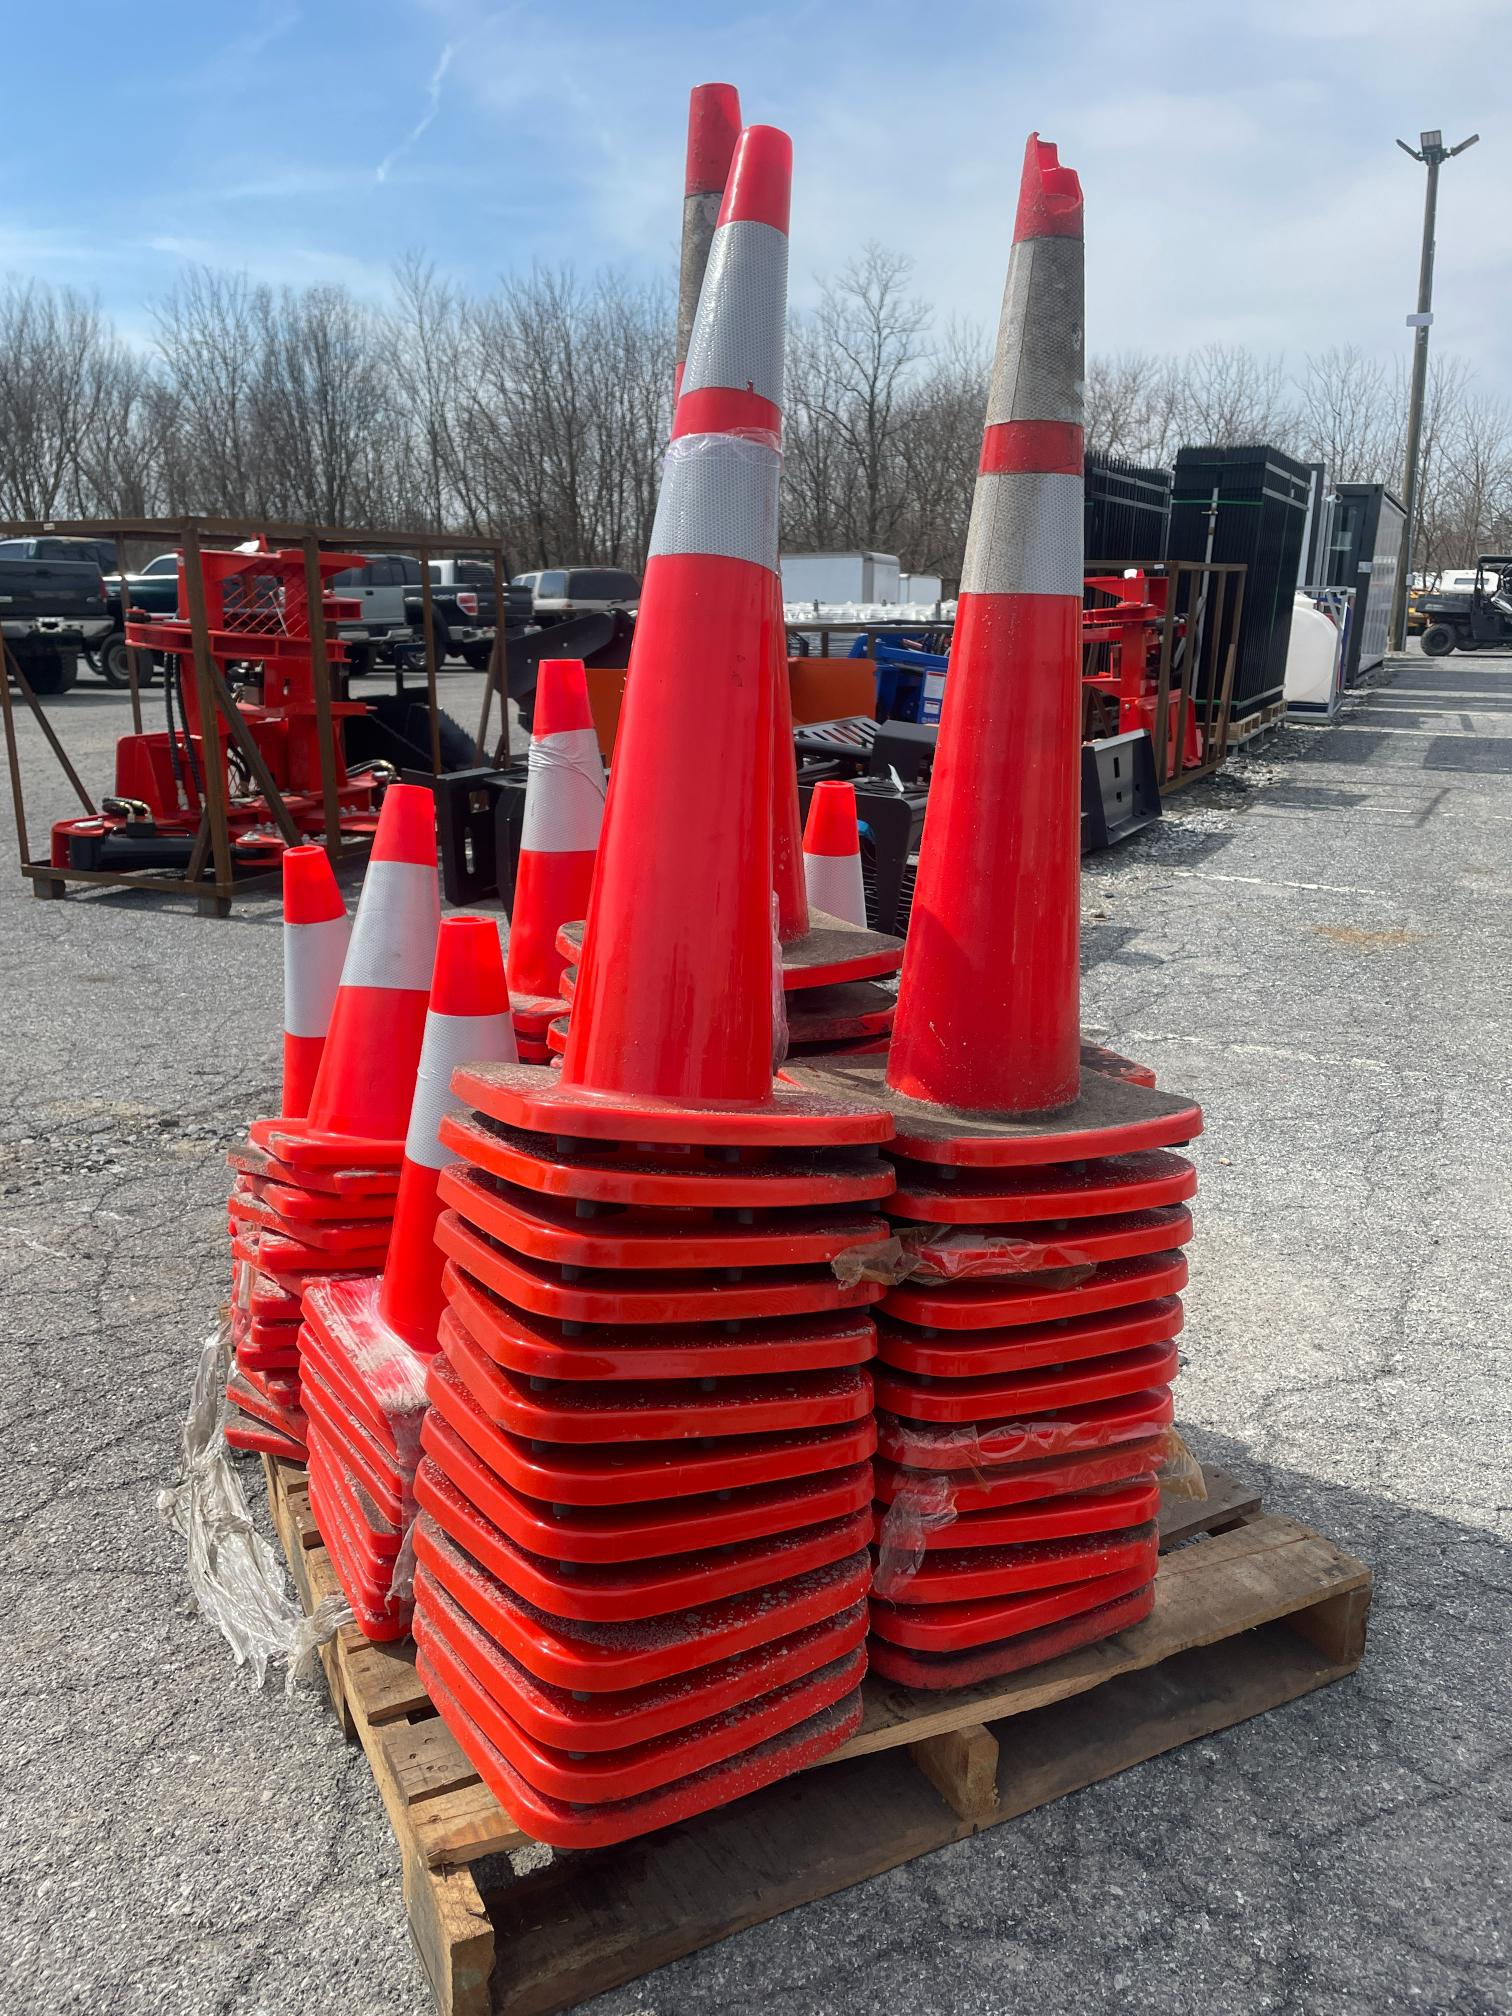 Skid Lot Of Assorted Size Traffic Cones